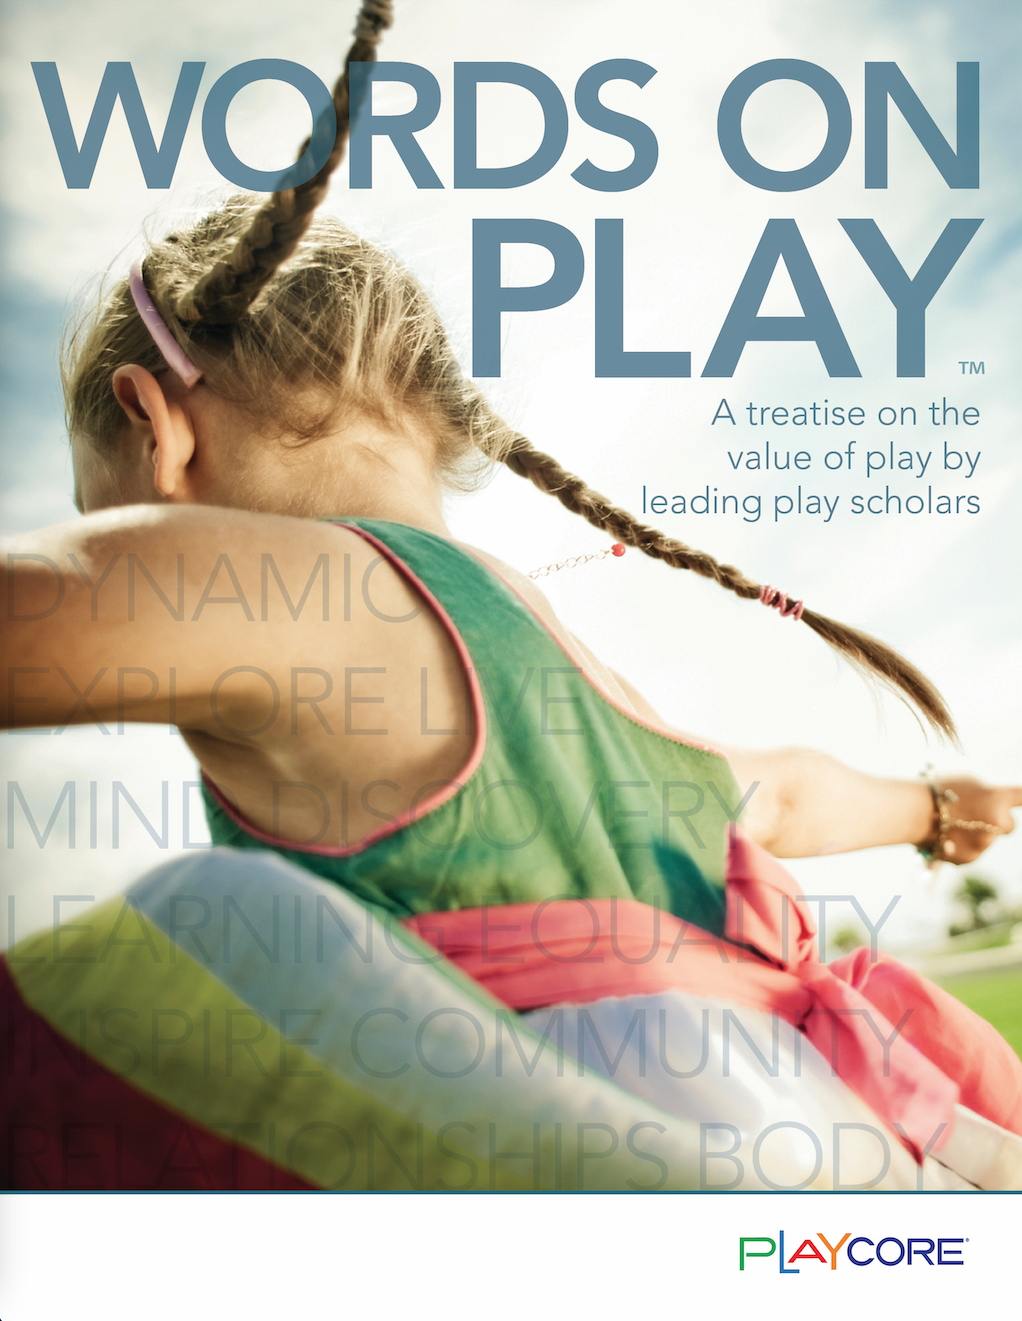 Words on Play Cover with a close-up shot of a young girl facing away from camera and playing during a sunny day